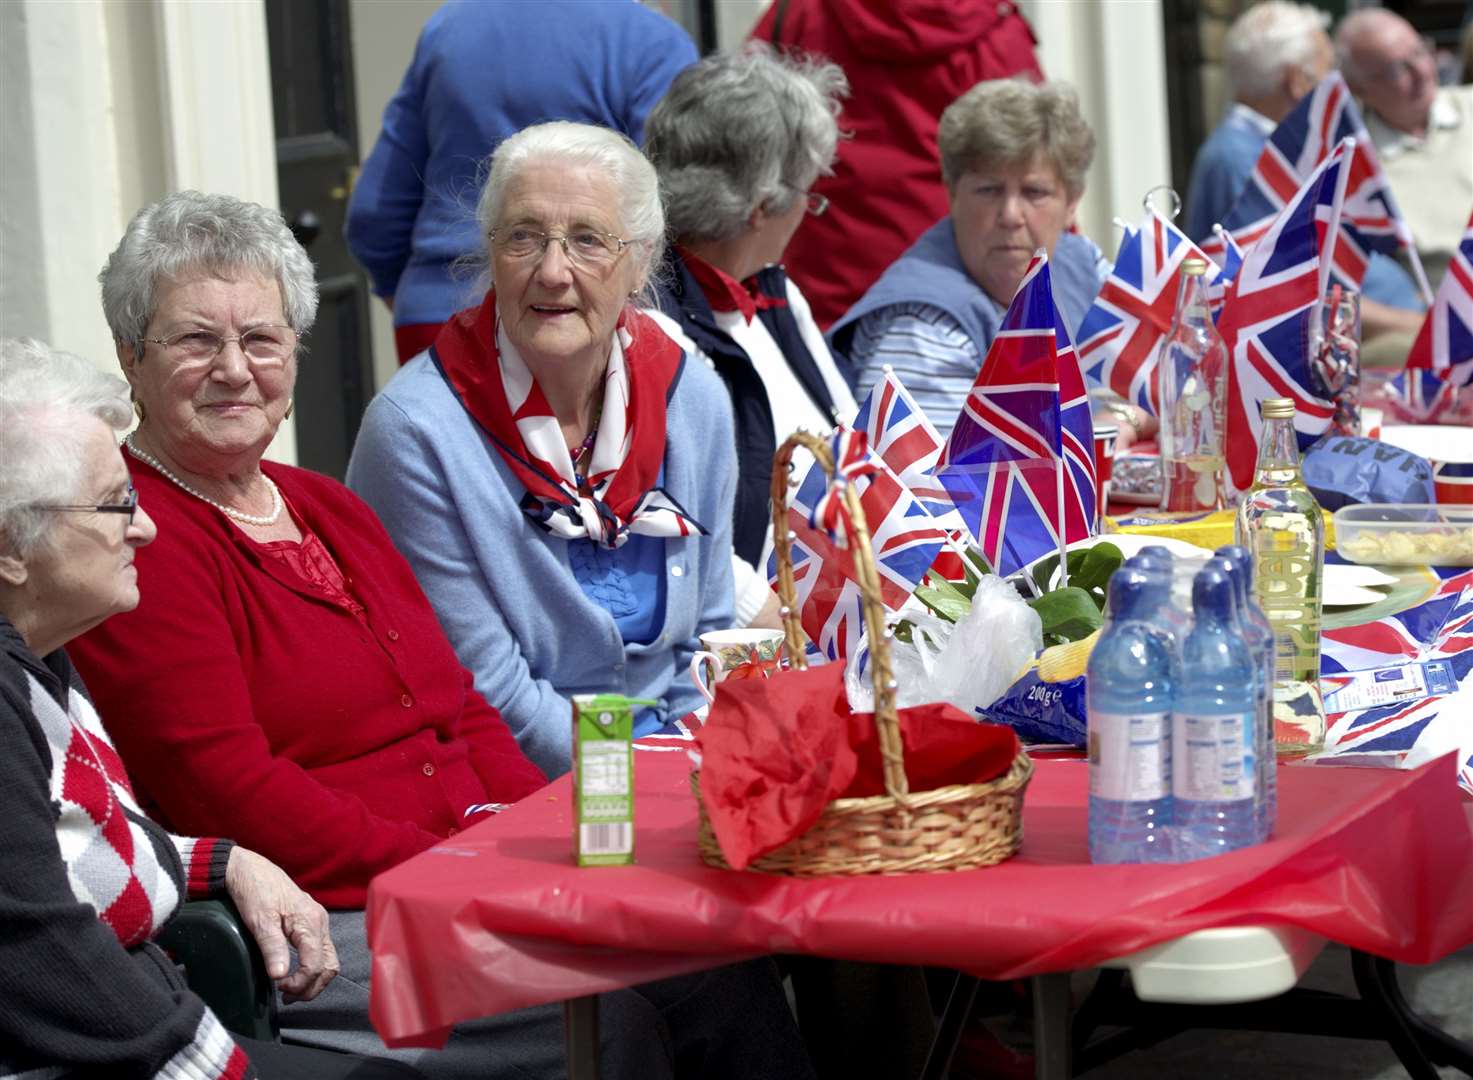 A street party in Dingwall – but could Highland Council have done more to mark the Queen's Platinum Jubilee?